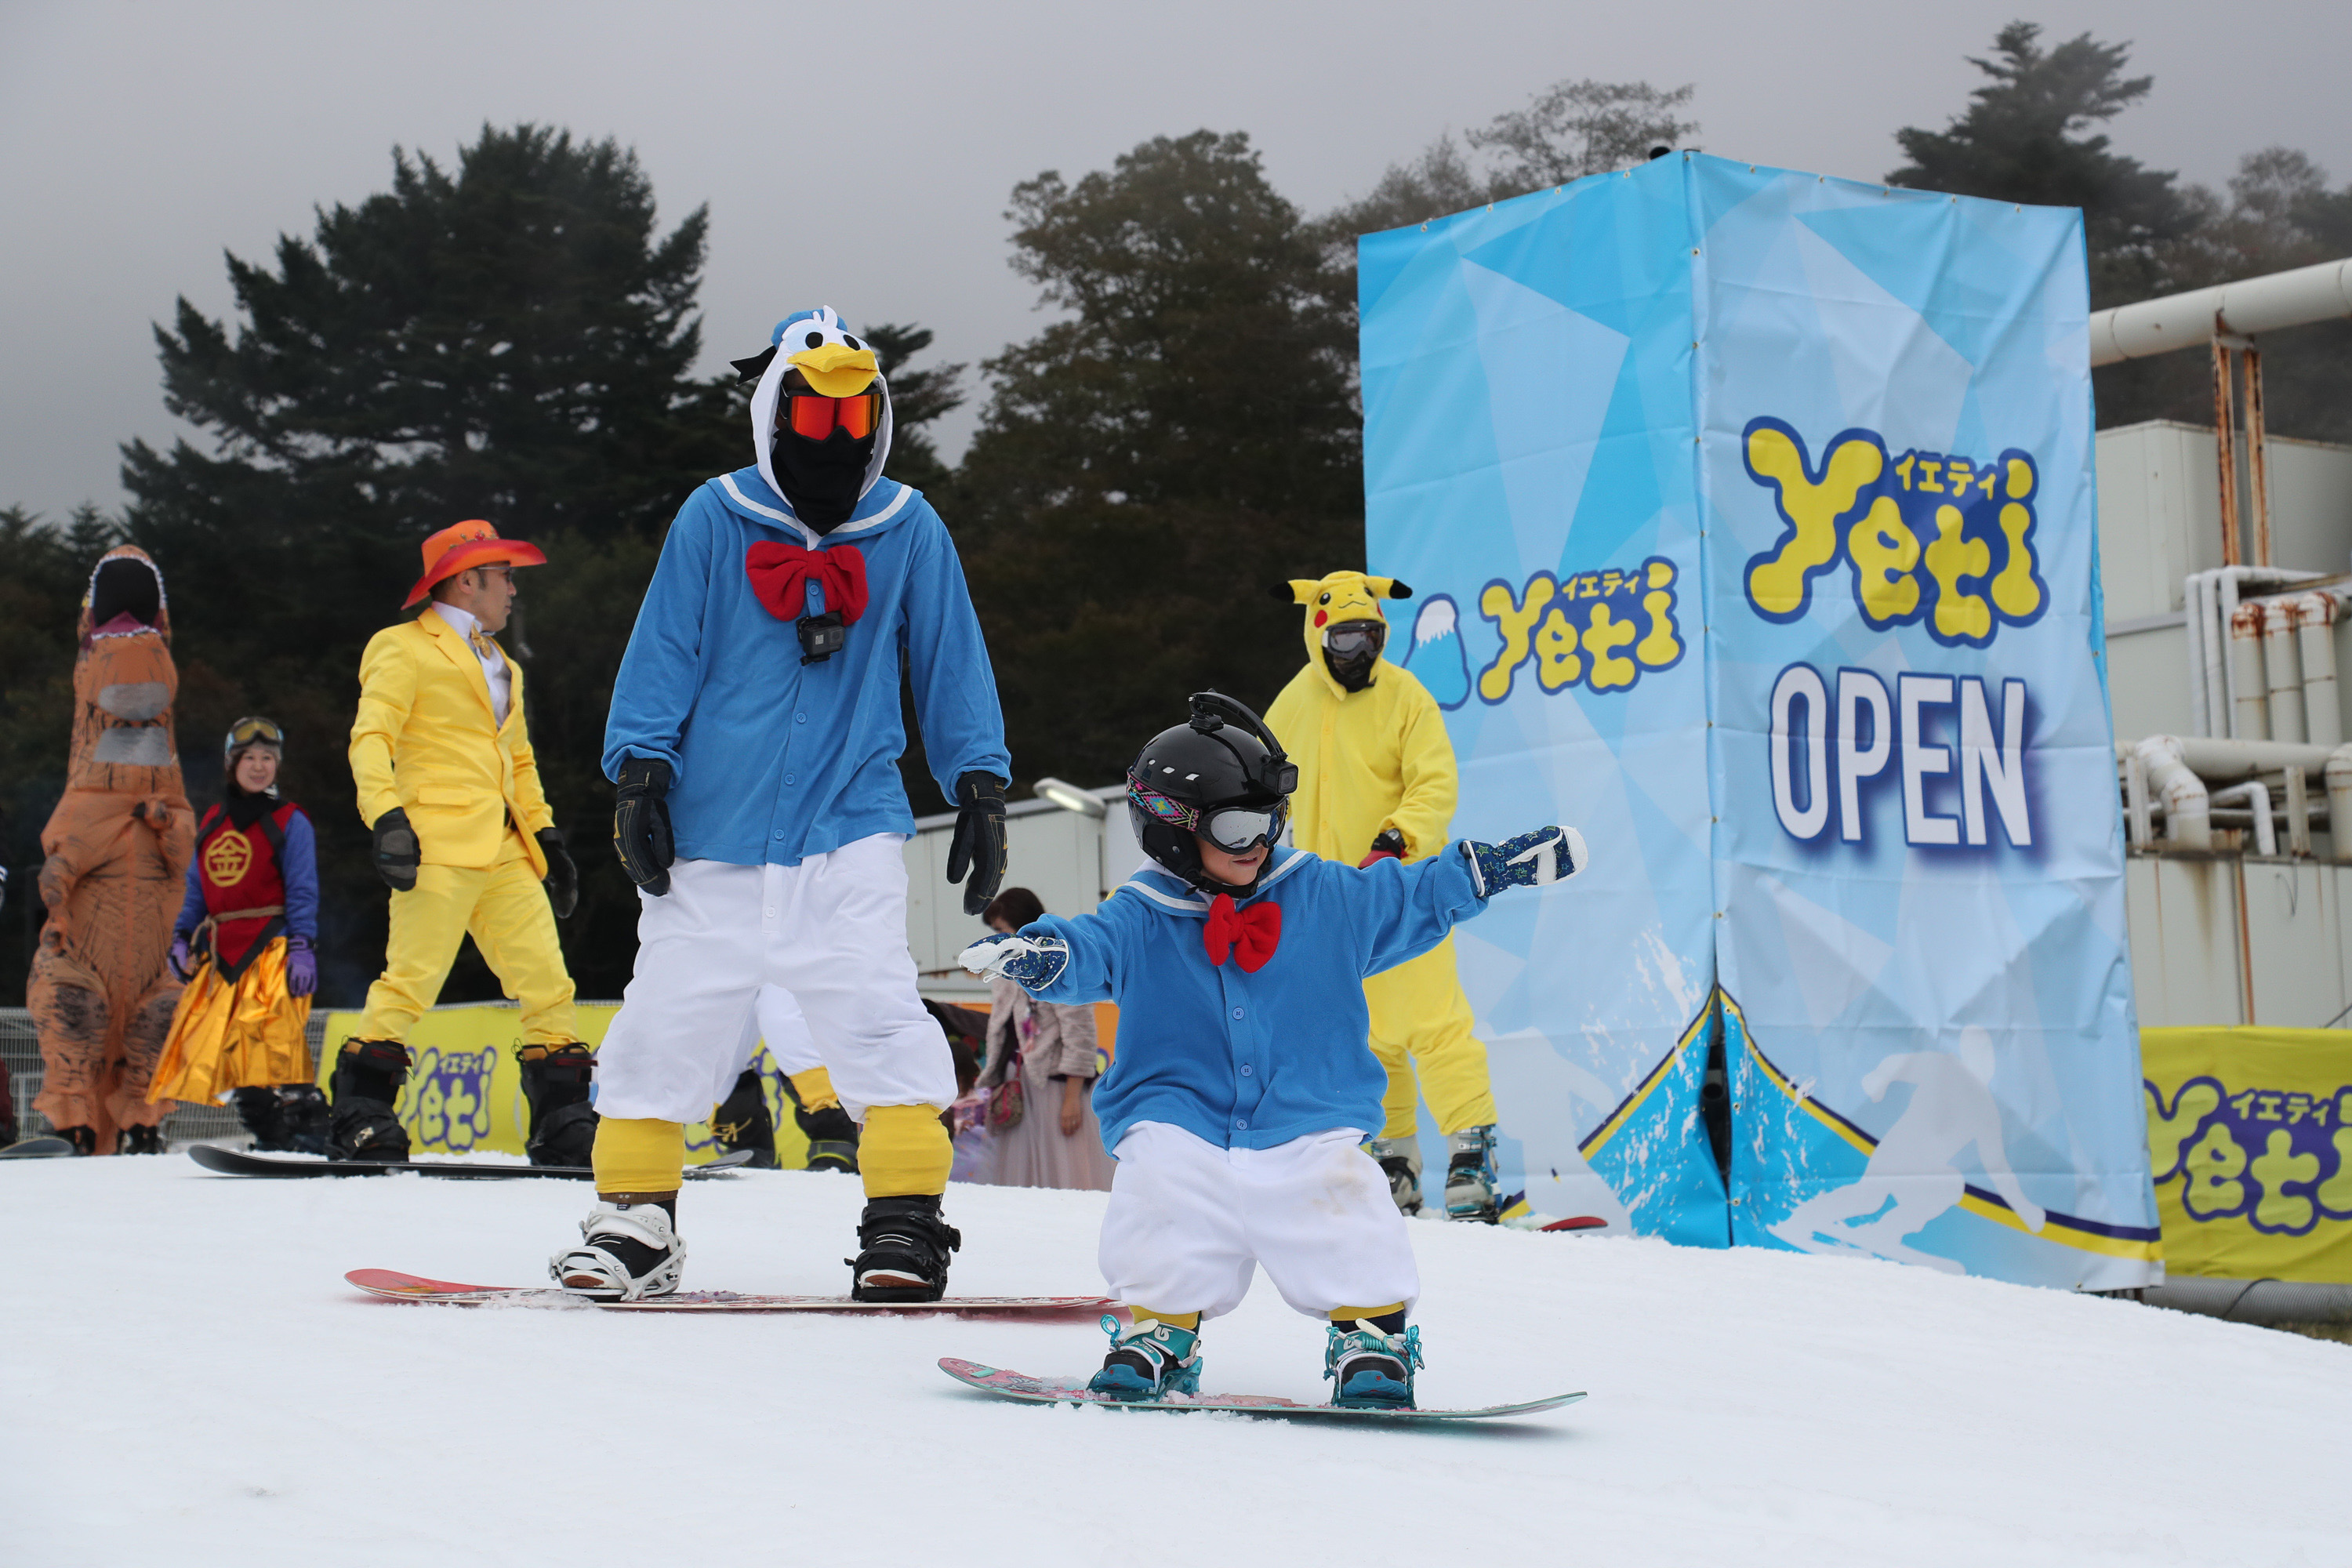 Yeti is a very popular slope for kids